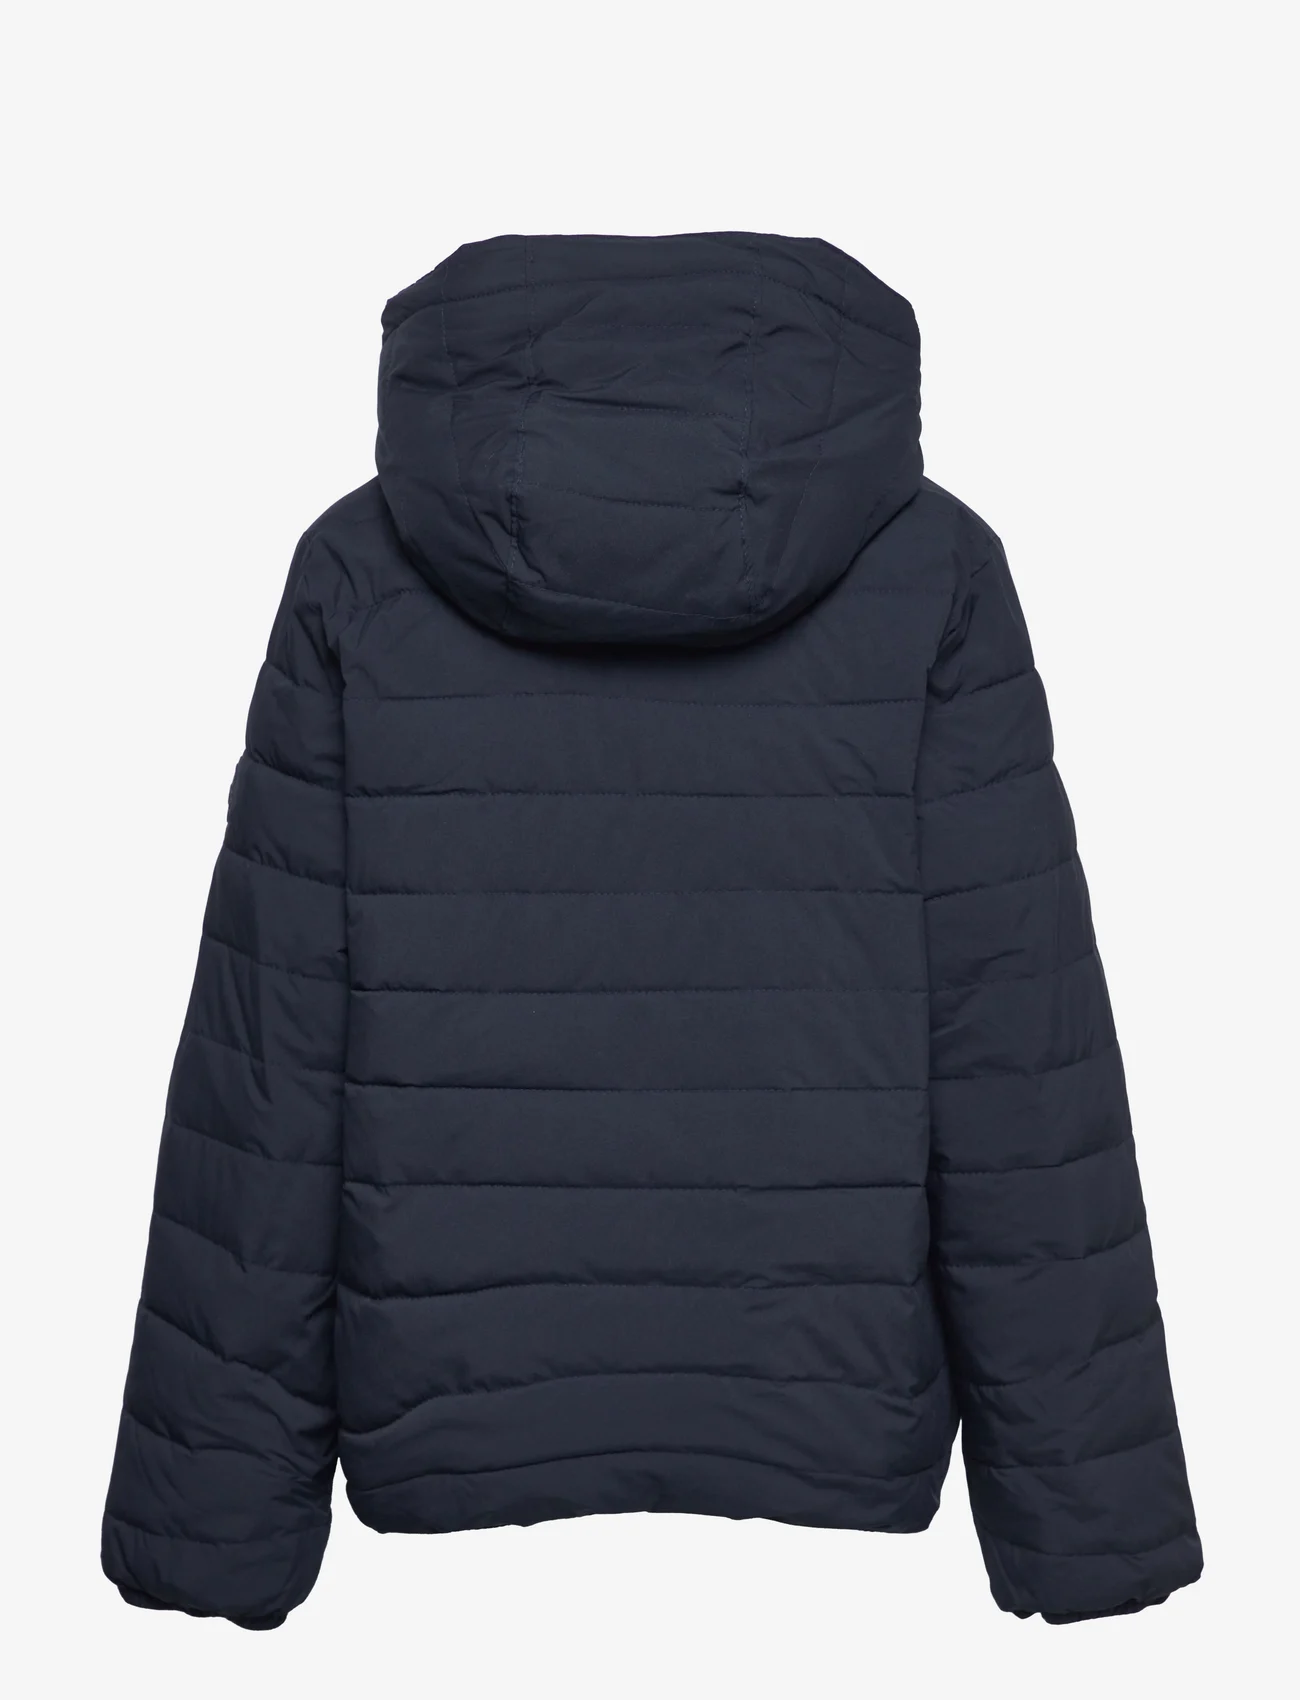 Abercrombie & Fitch - kids BOYS OUTERWEAR - puffer & padded - navy - 1